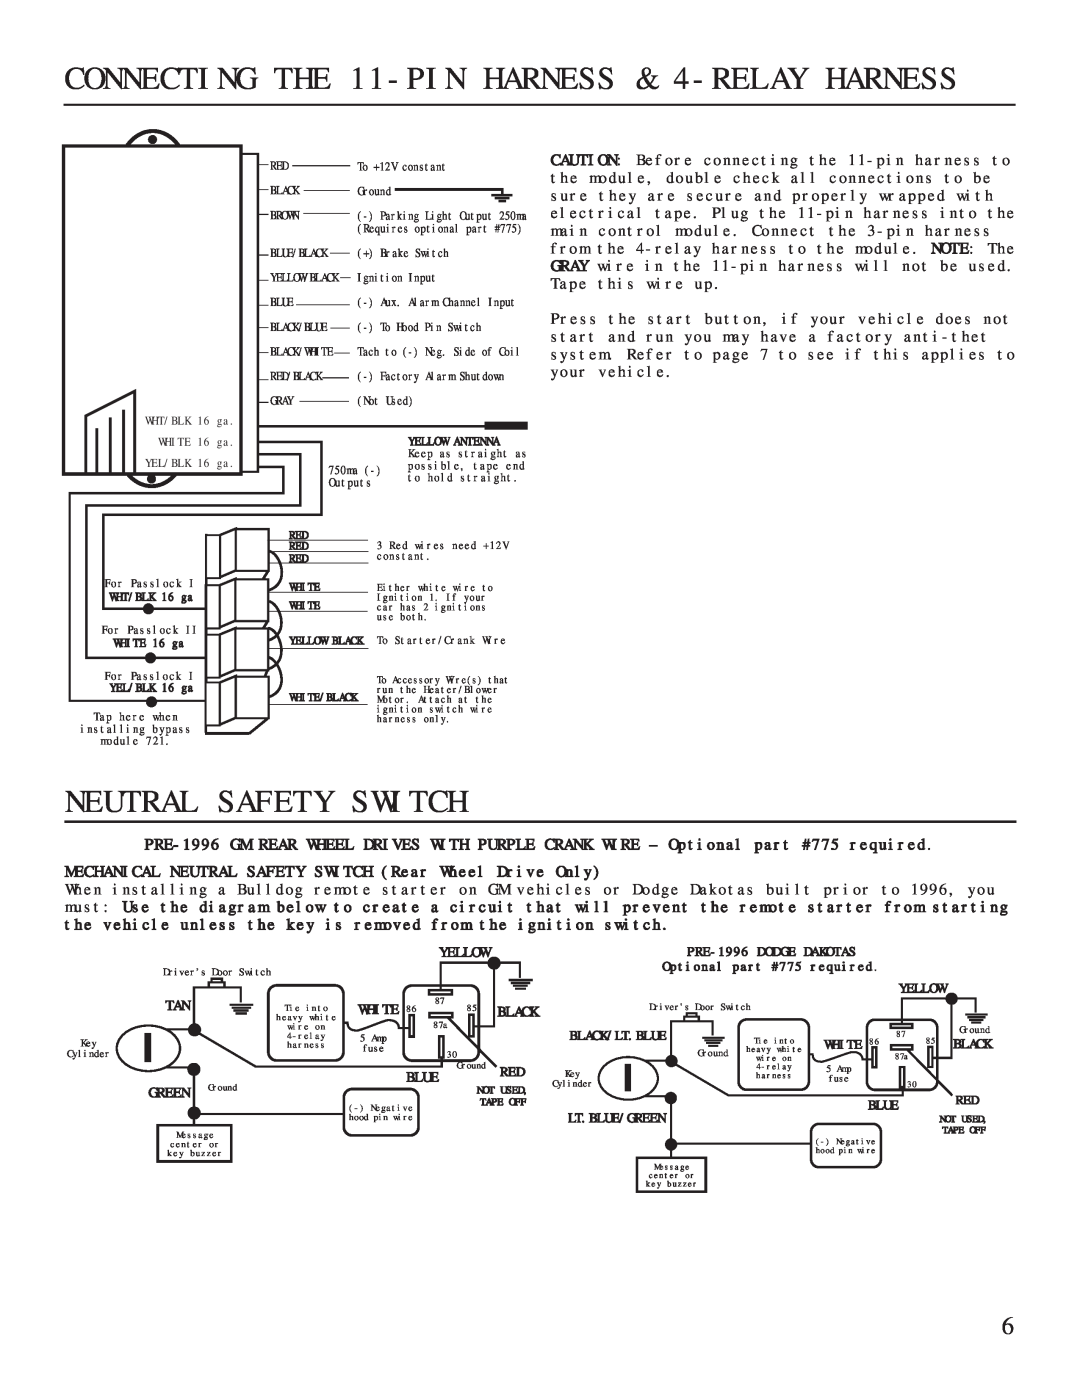 Bulldog Security RS82 manual CONNECTING THE 11-PIN HARNESS & 4-RELAY HARNESS, Neutral Safety Switch 